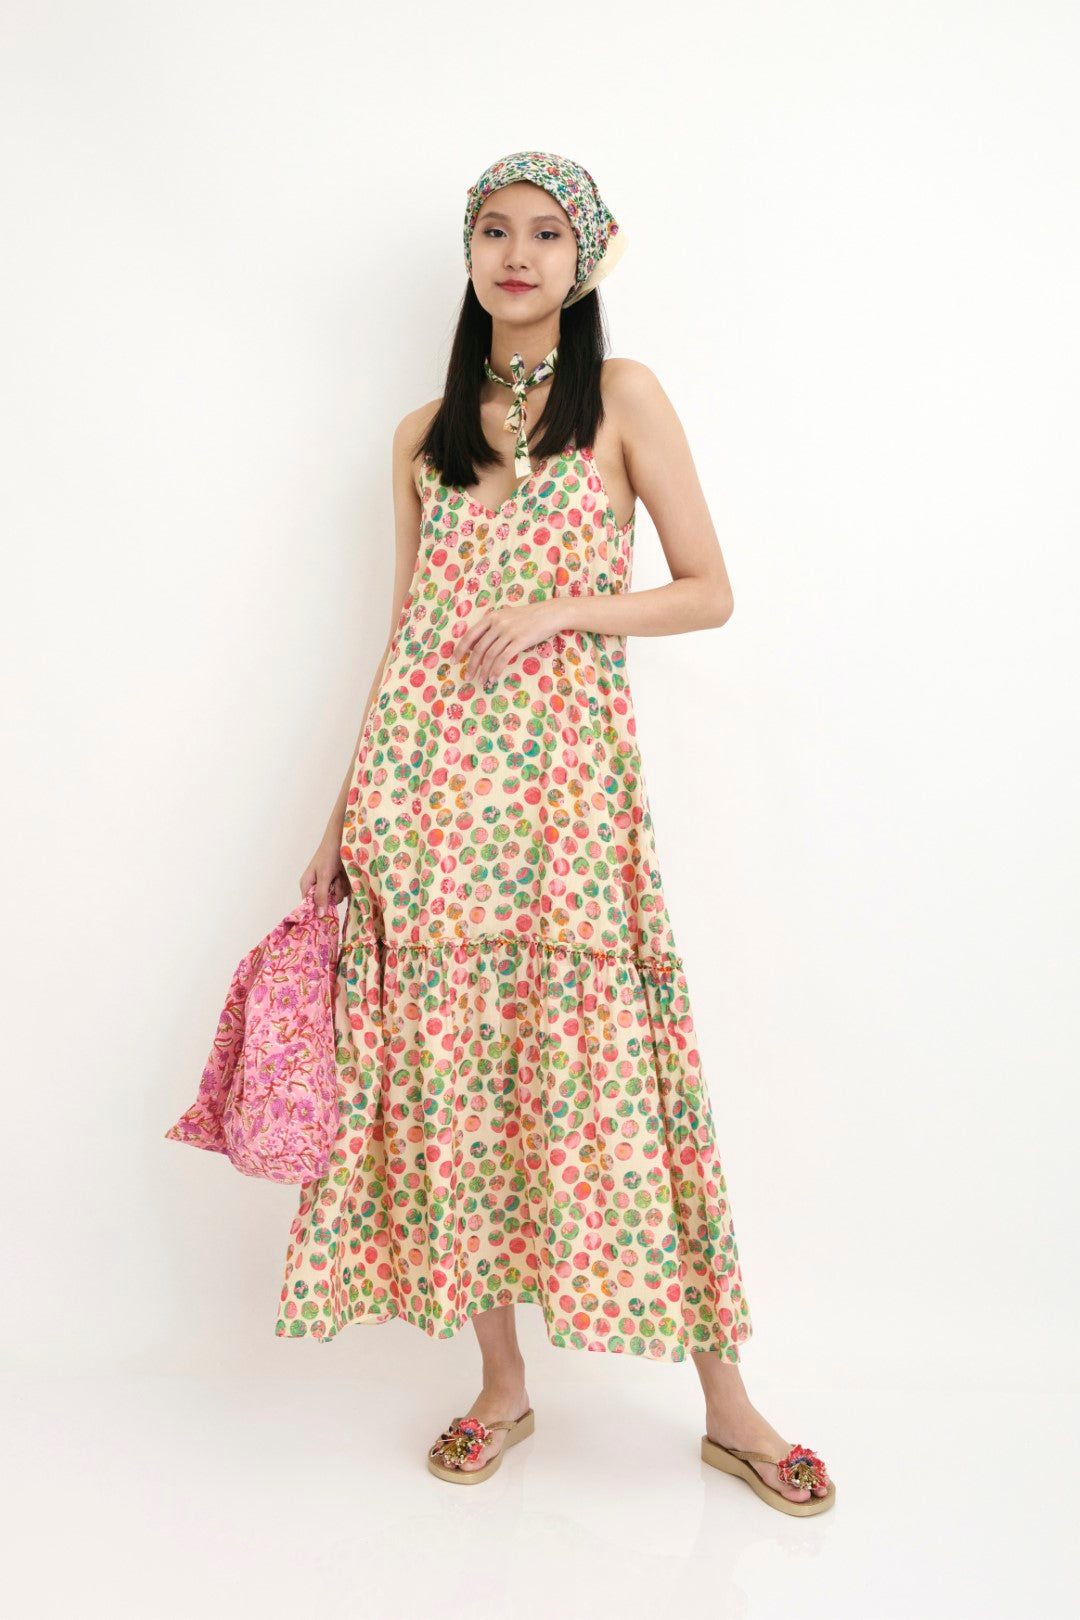 "Handwoven cotton silk polka dot strap dress with pink shaded sequence & hand embroidery detail. 100% Handwoven cotton silk; Lining: 100% cotton 100% Azo Free Dry Clean Only"